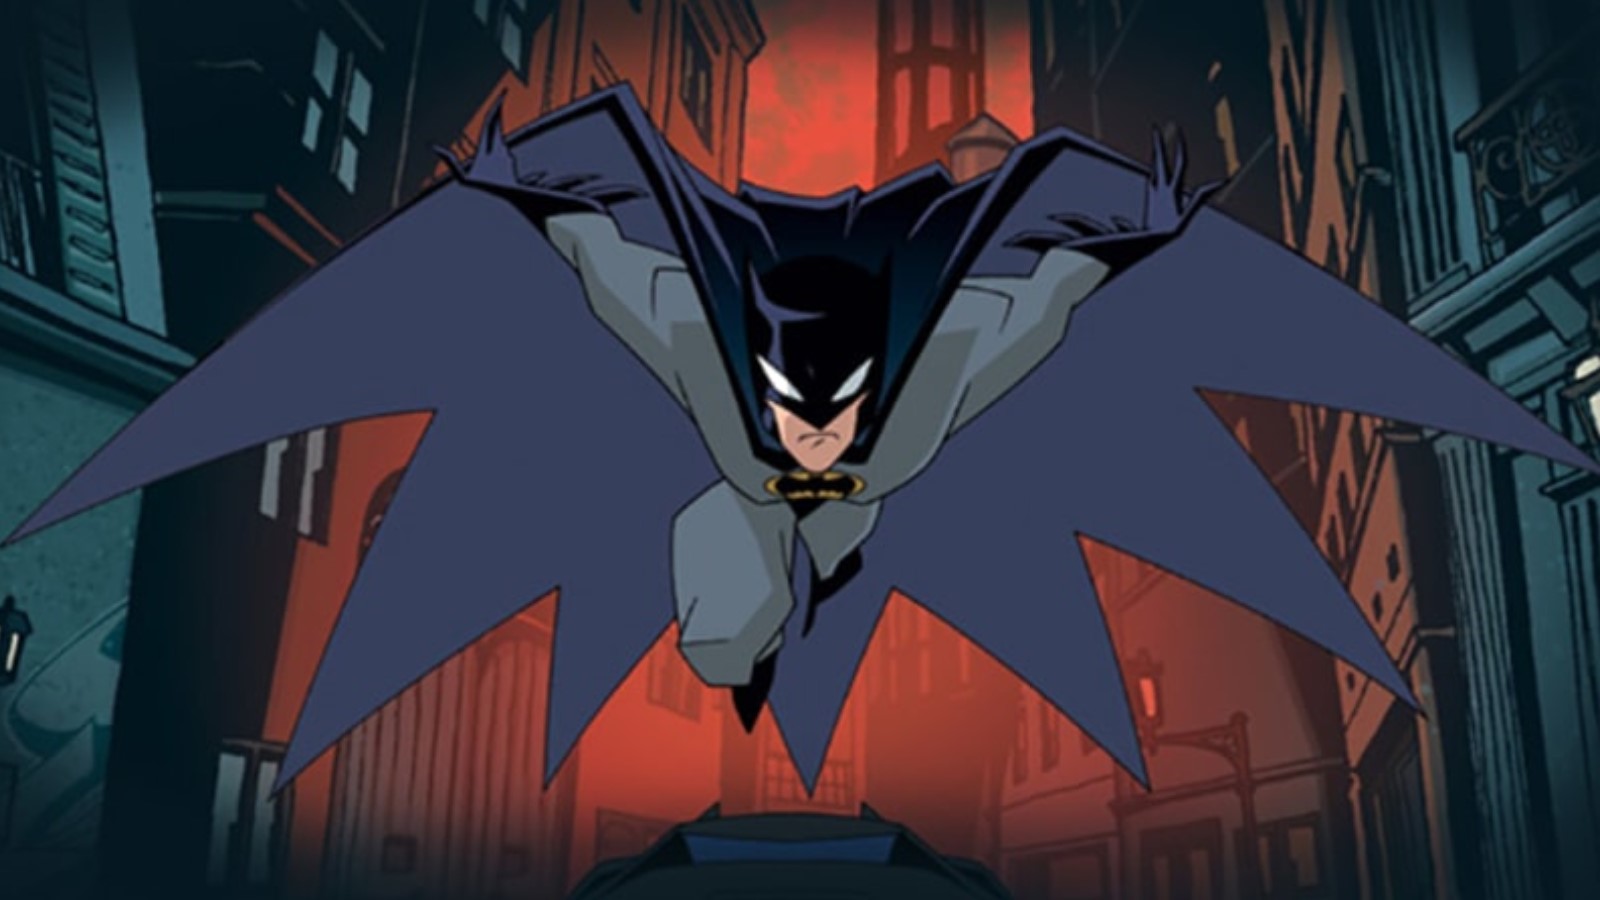 A remastered version of The Batman: The Complete Series is heading to  Blu-Ray and Digital in February, 2022 - GAMING TREND